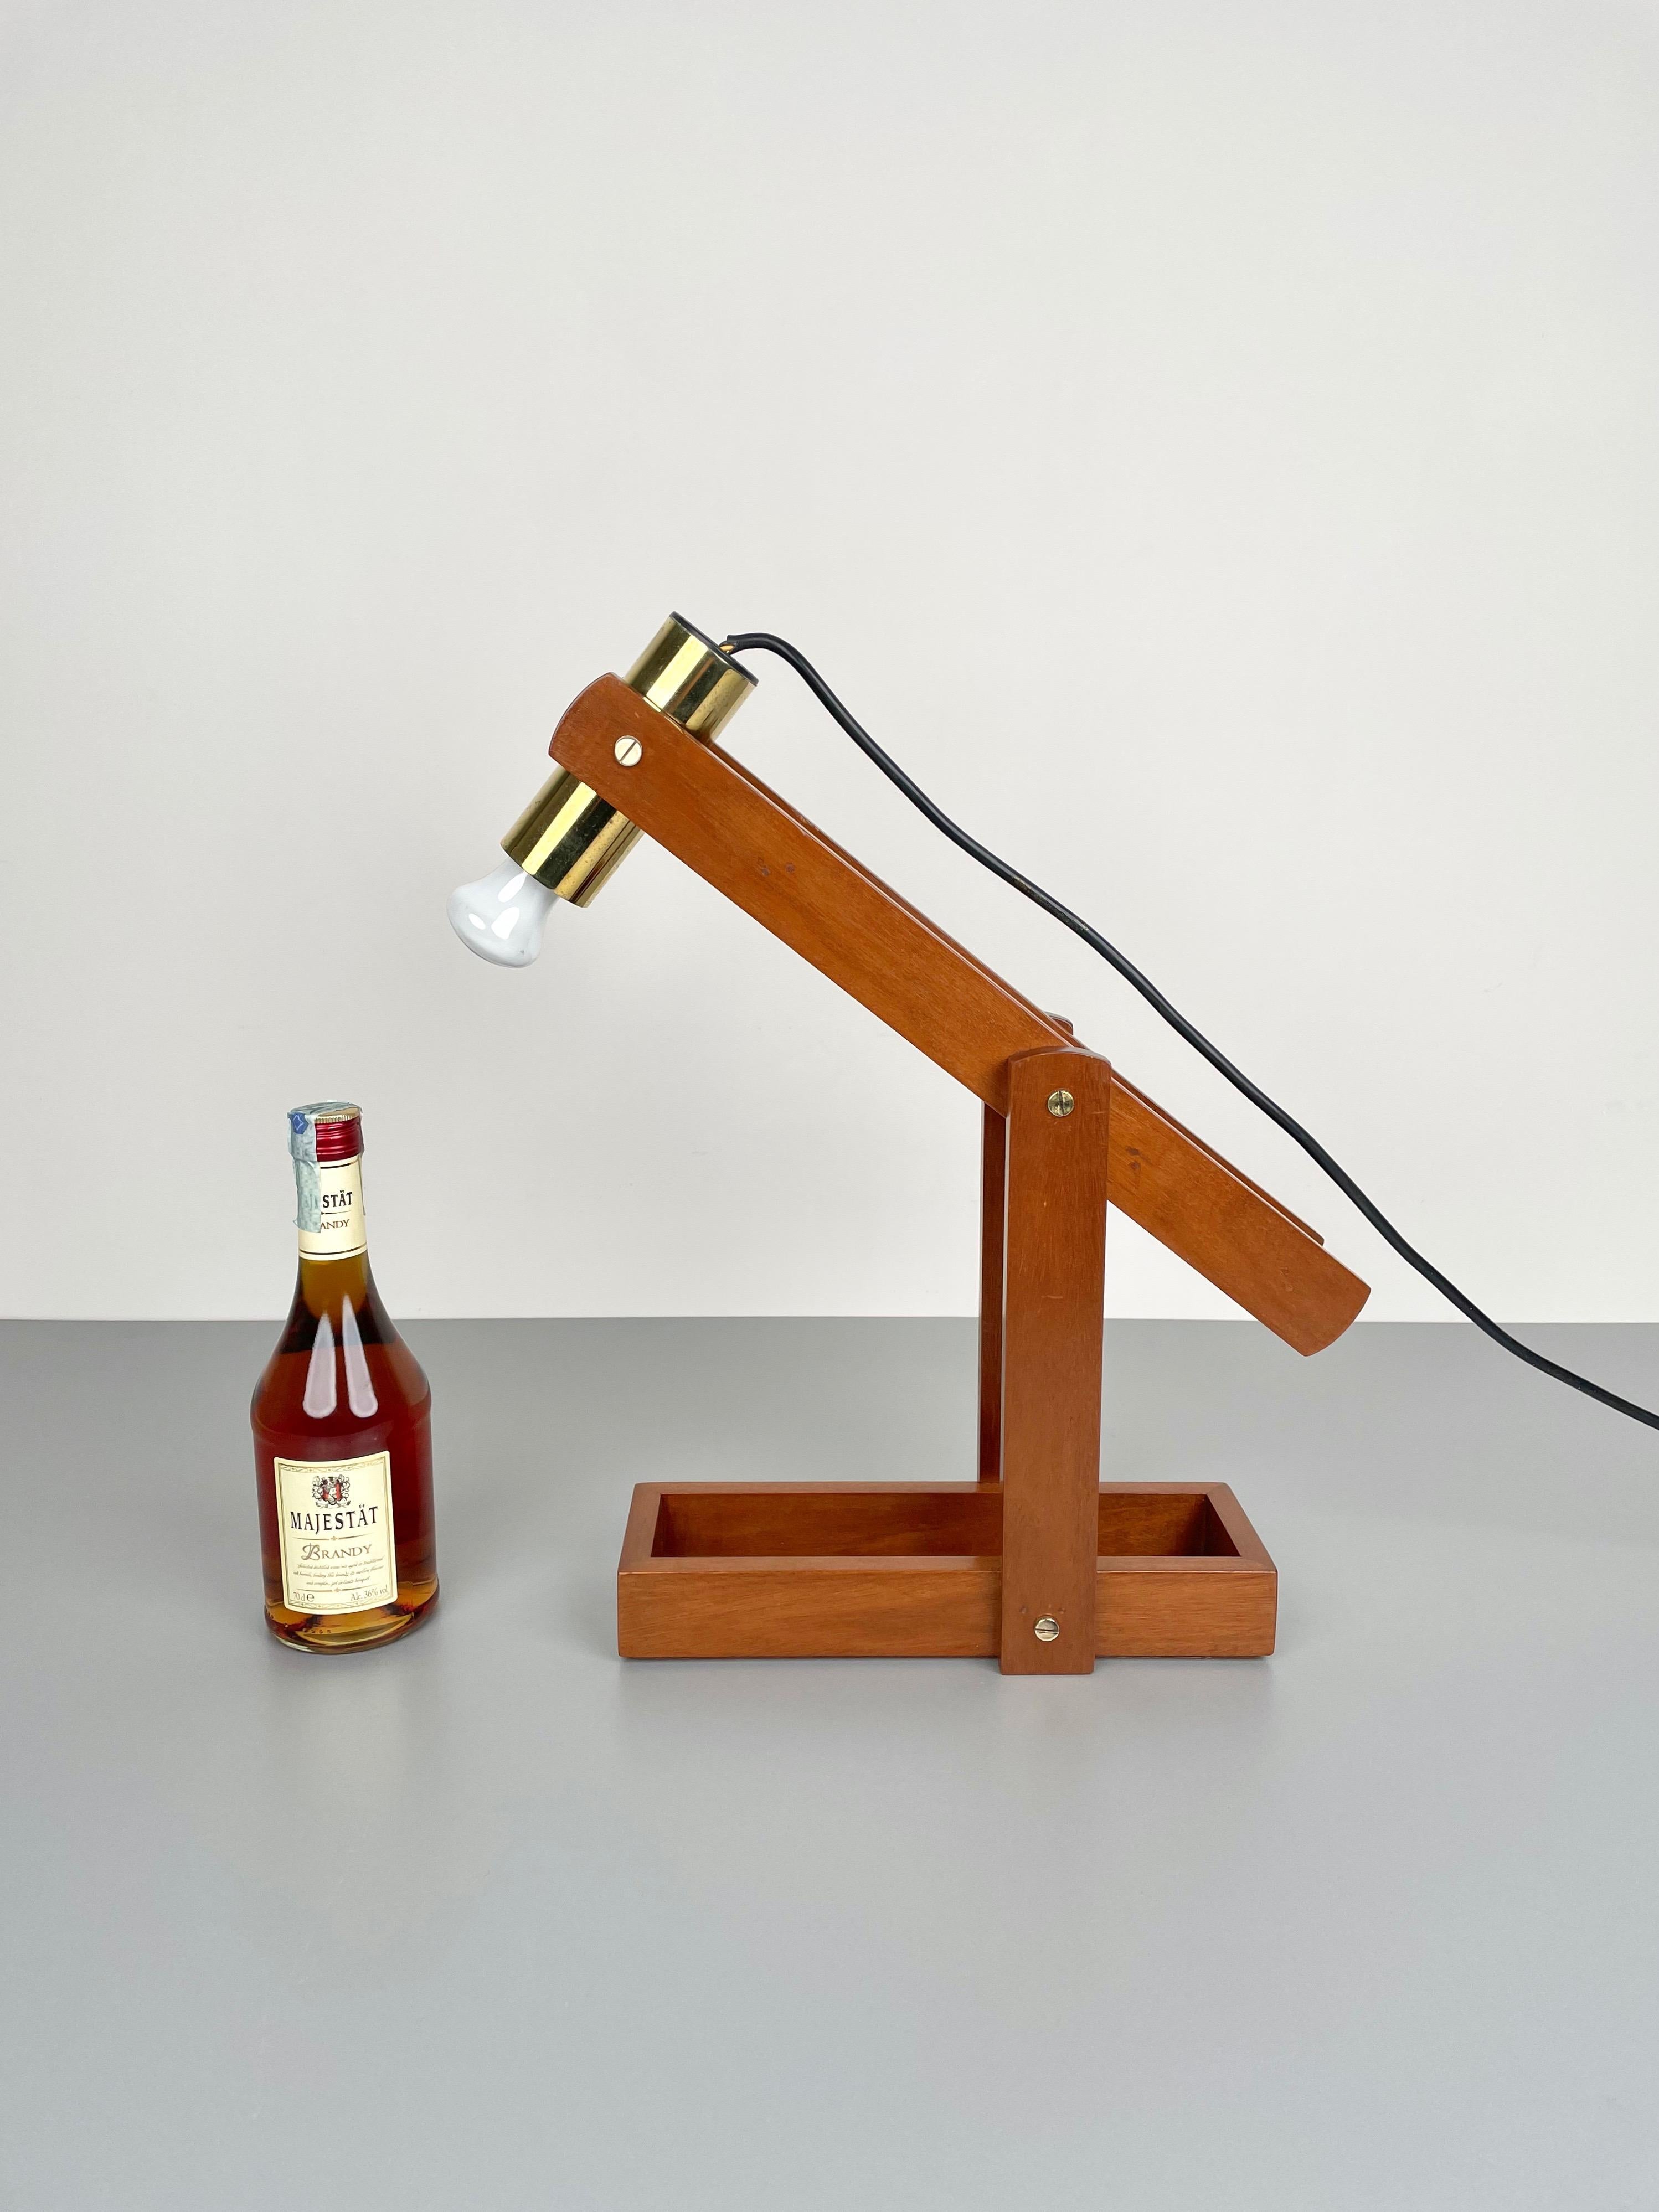 Adjustable Wood & Brass Table Lamp, Italy, 1960s For Sale 11